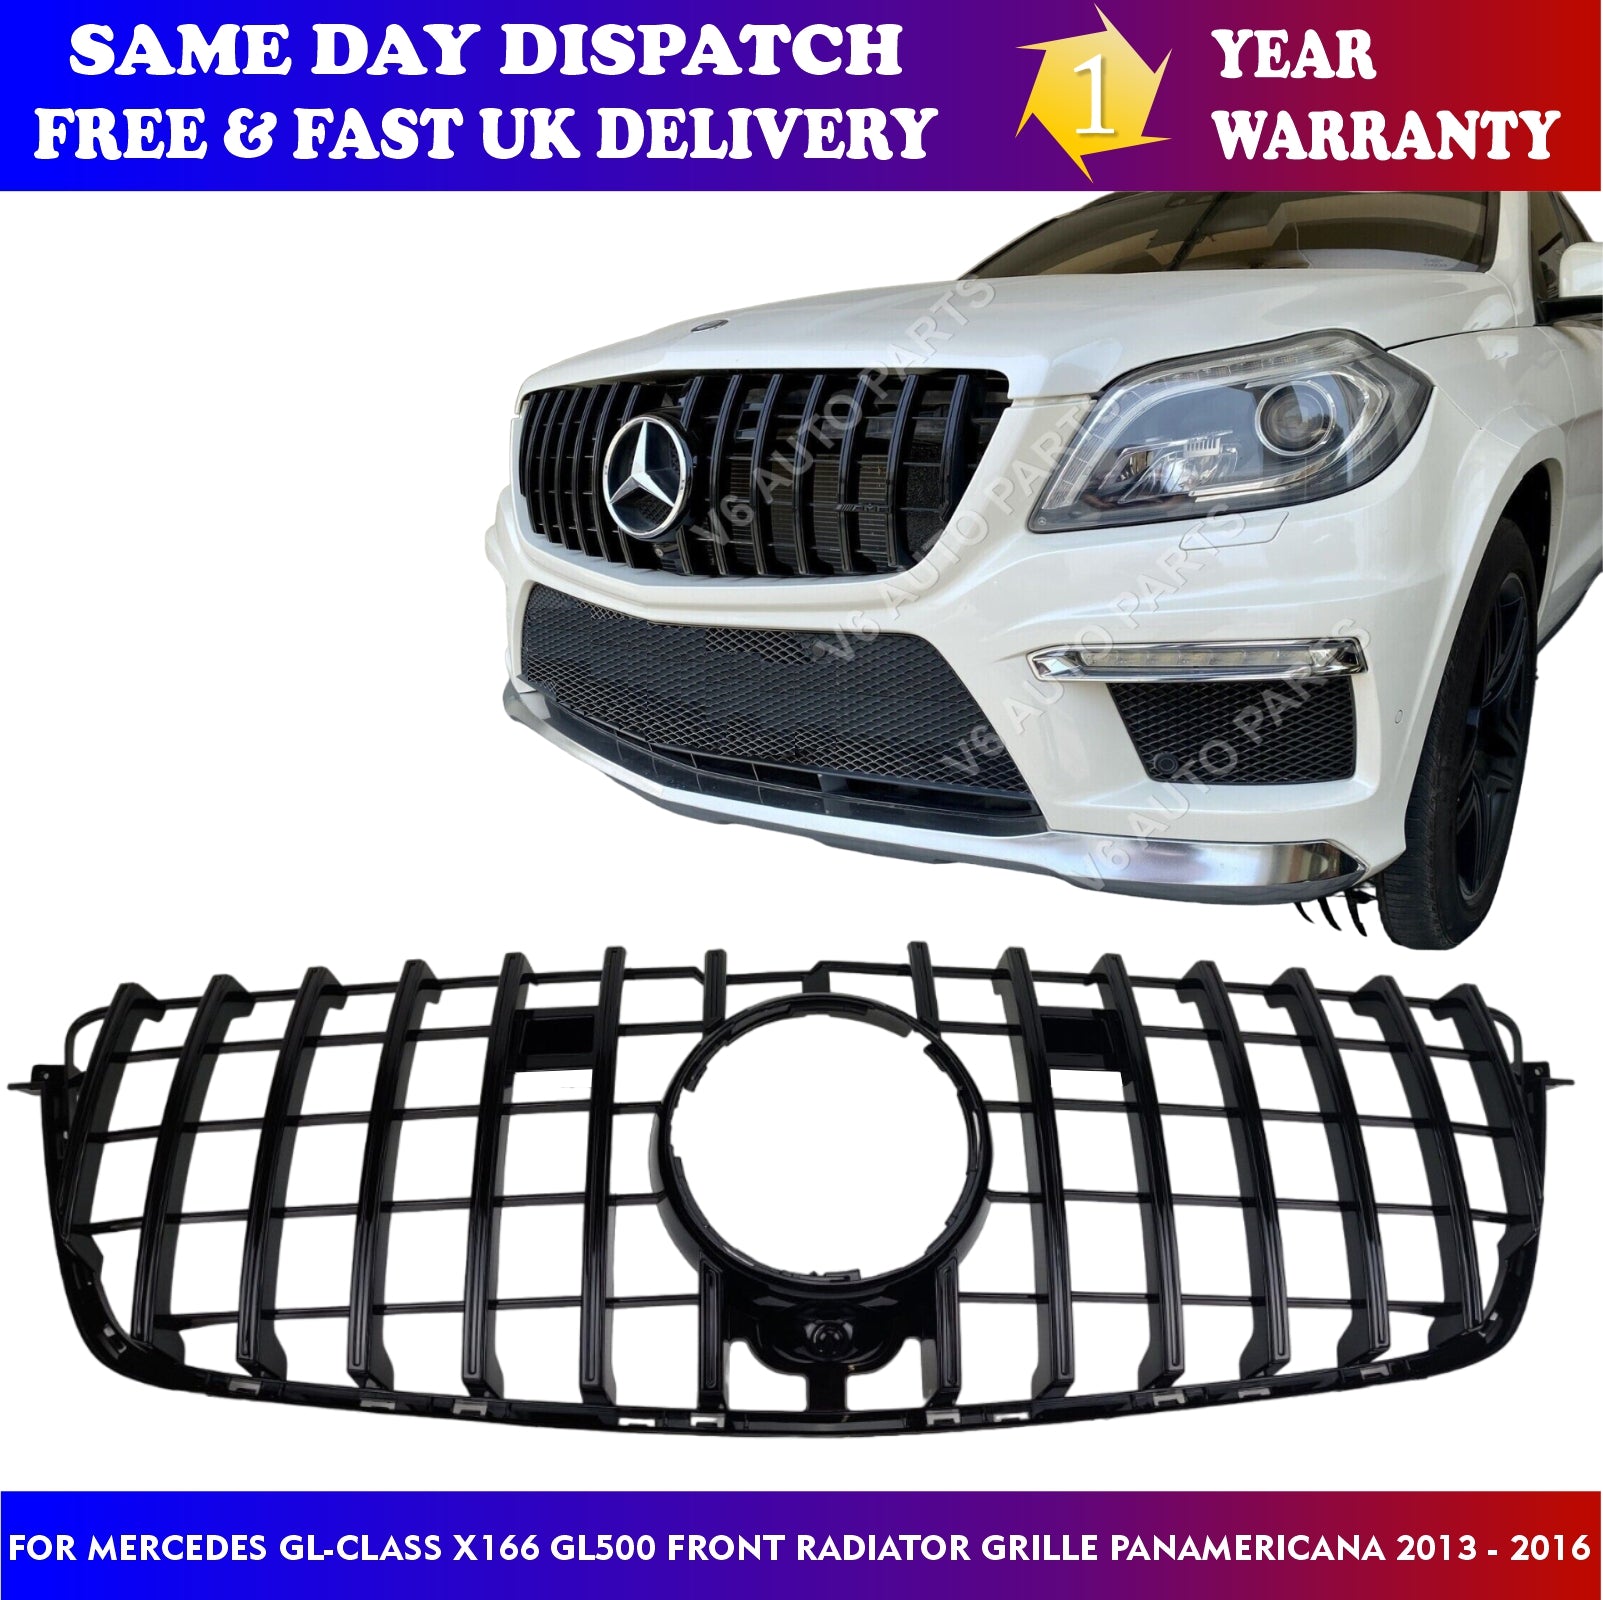 For Mercedes GL-Class X166 GL500 Front Radiator Grille Panamericana 2013 - 2016